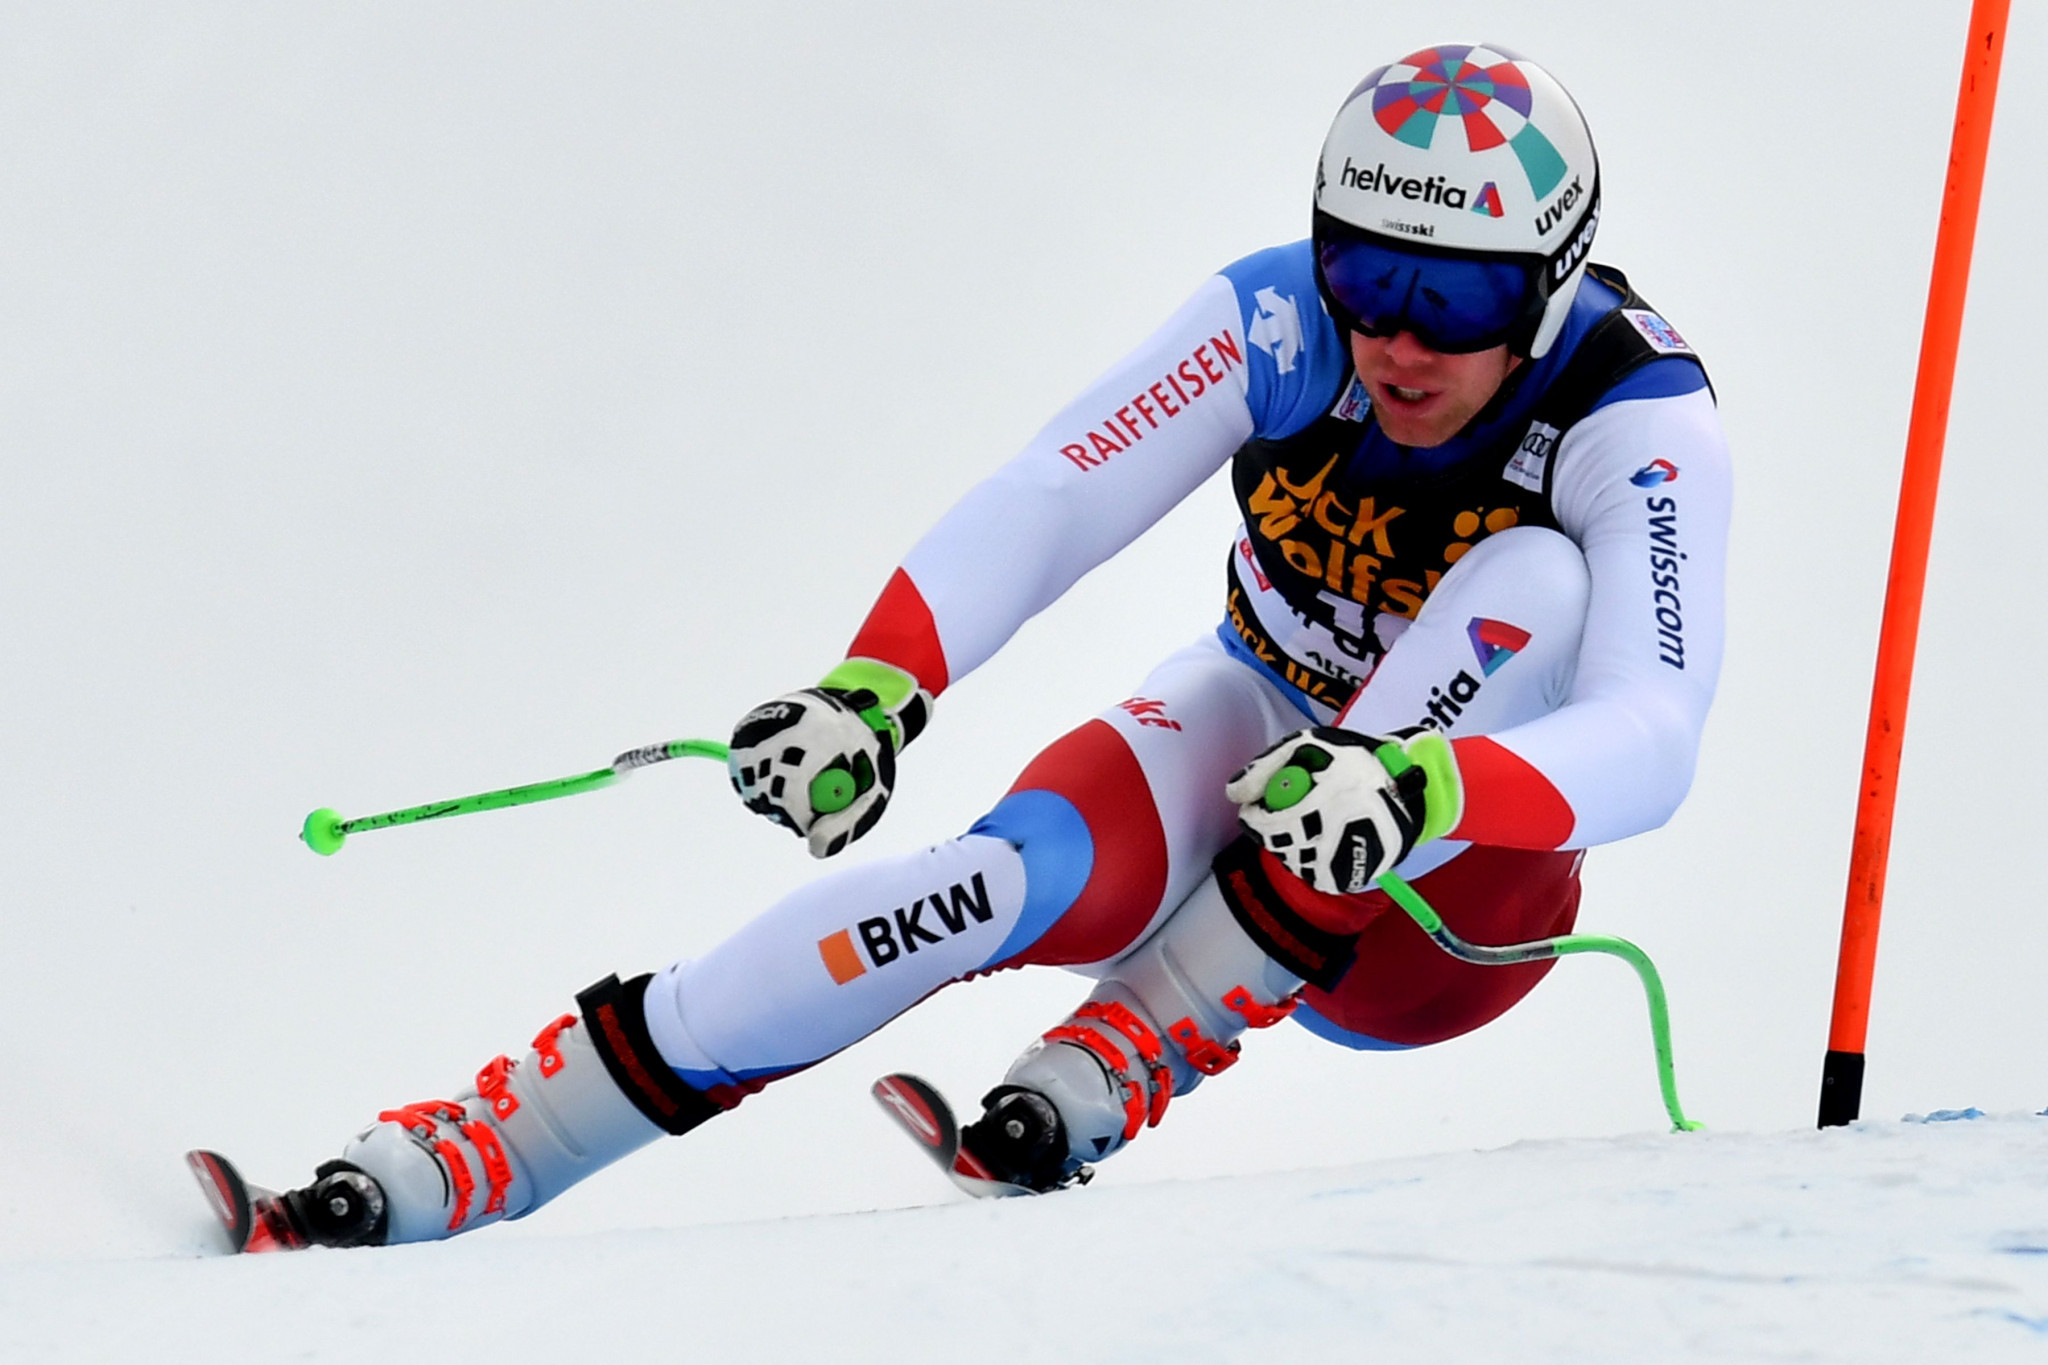 Gisin retires after failing to recover from horror crash at FIS Alpine Ski World Cup in Val Gardena